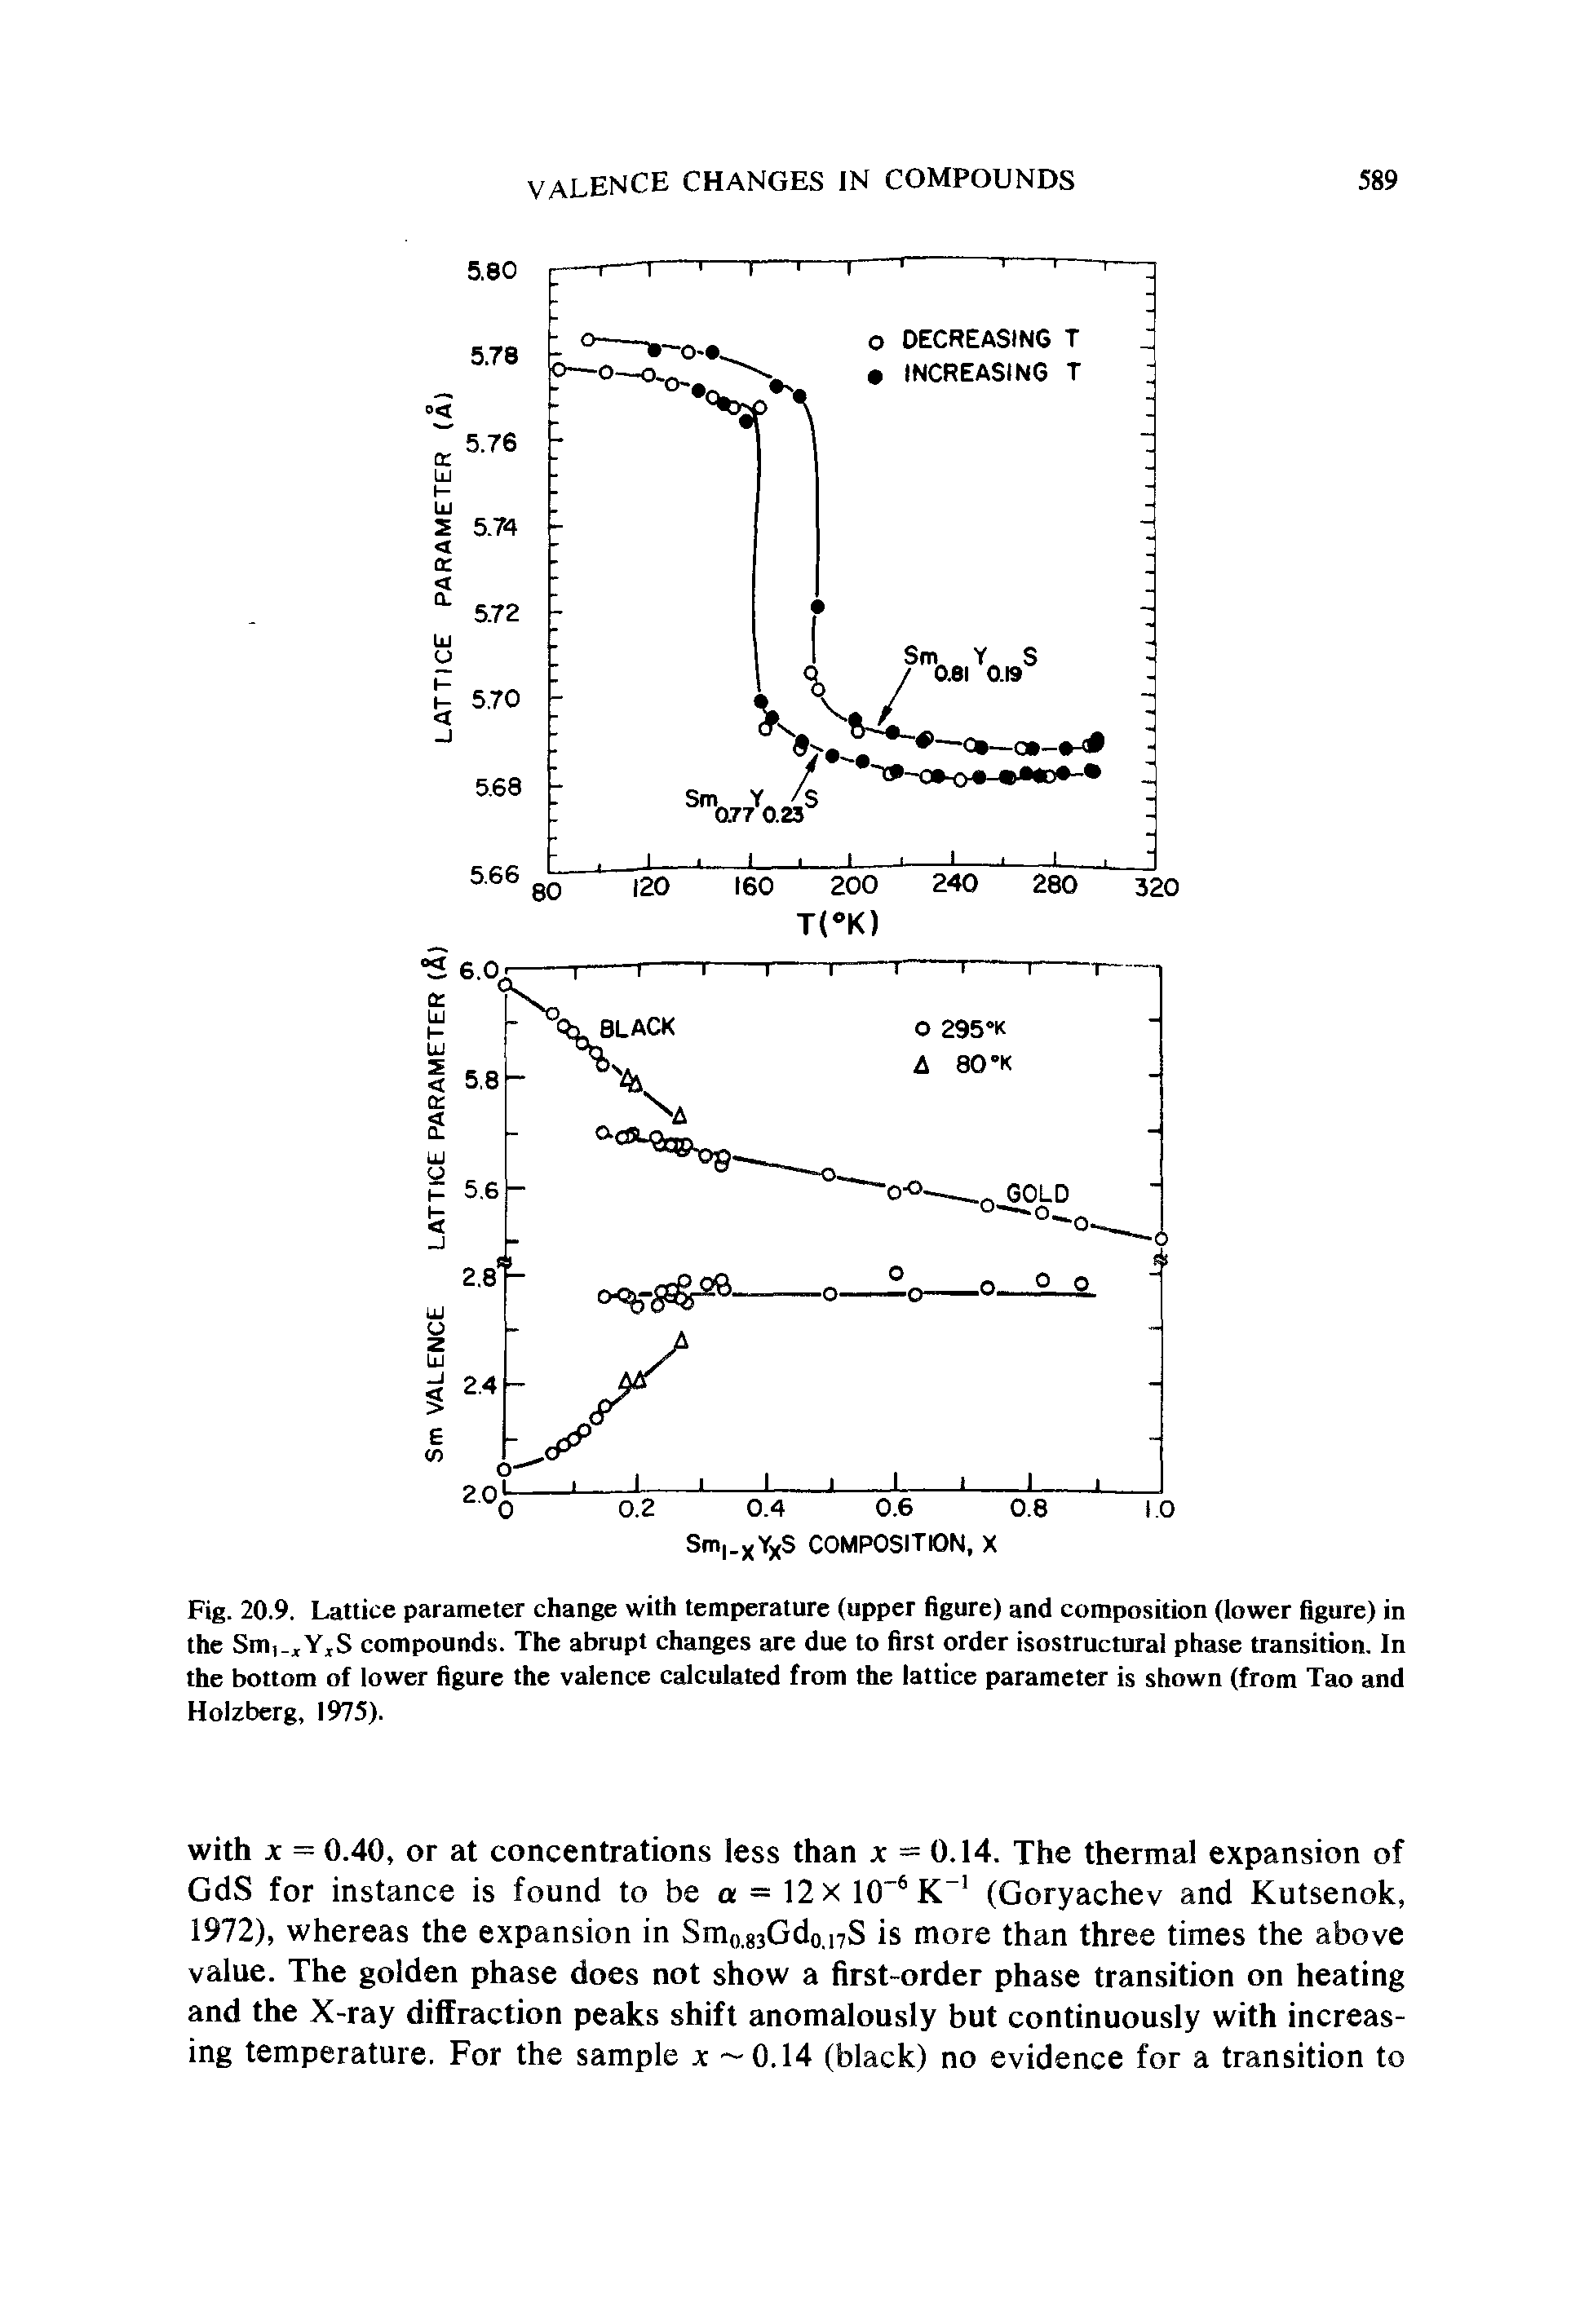 Fig. 20.9. Lattice parameter change with temperature (upper figure) and composition (lower figure) in the Sm., Yi compounds. The abrupt changes are due to first order isostructural phase transition. In the bottom of lower figure the valence calculated from the lattice parameter is shown (from Tao and Holzberg, 1975).